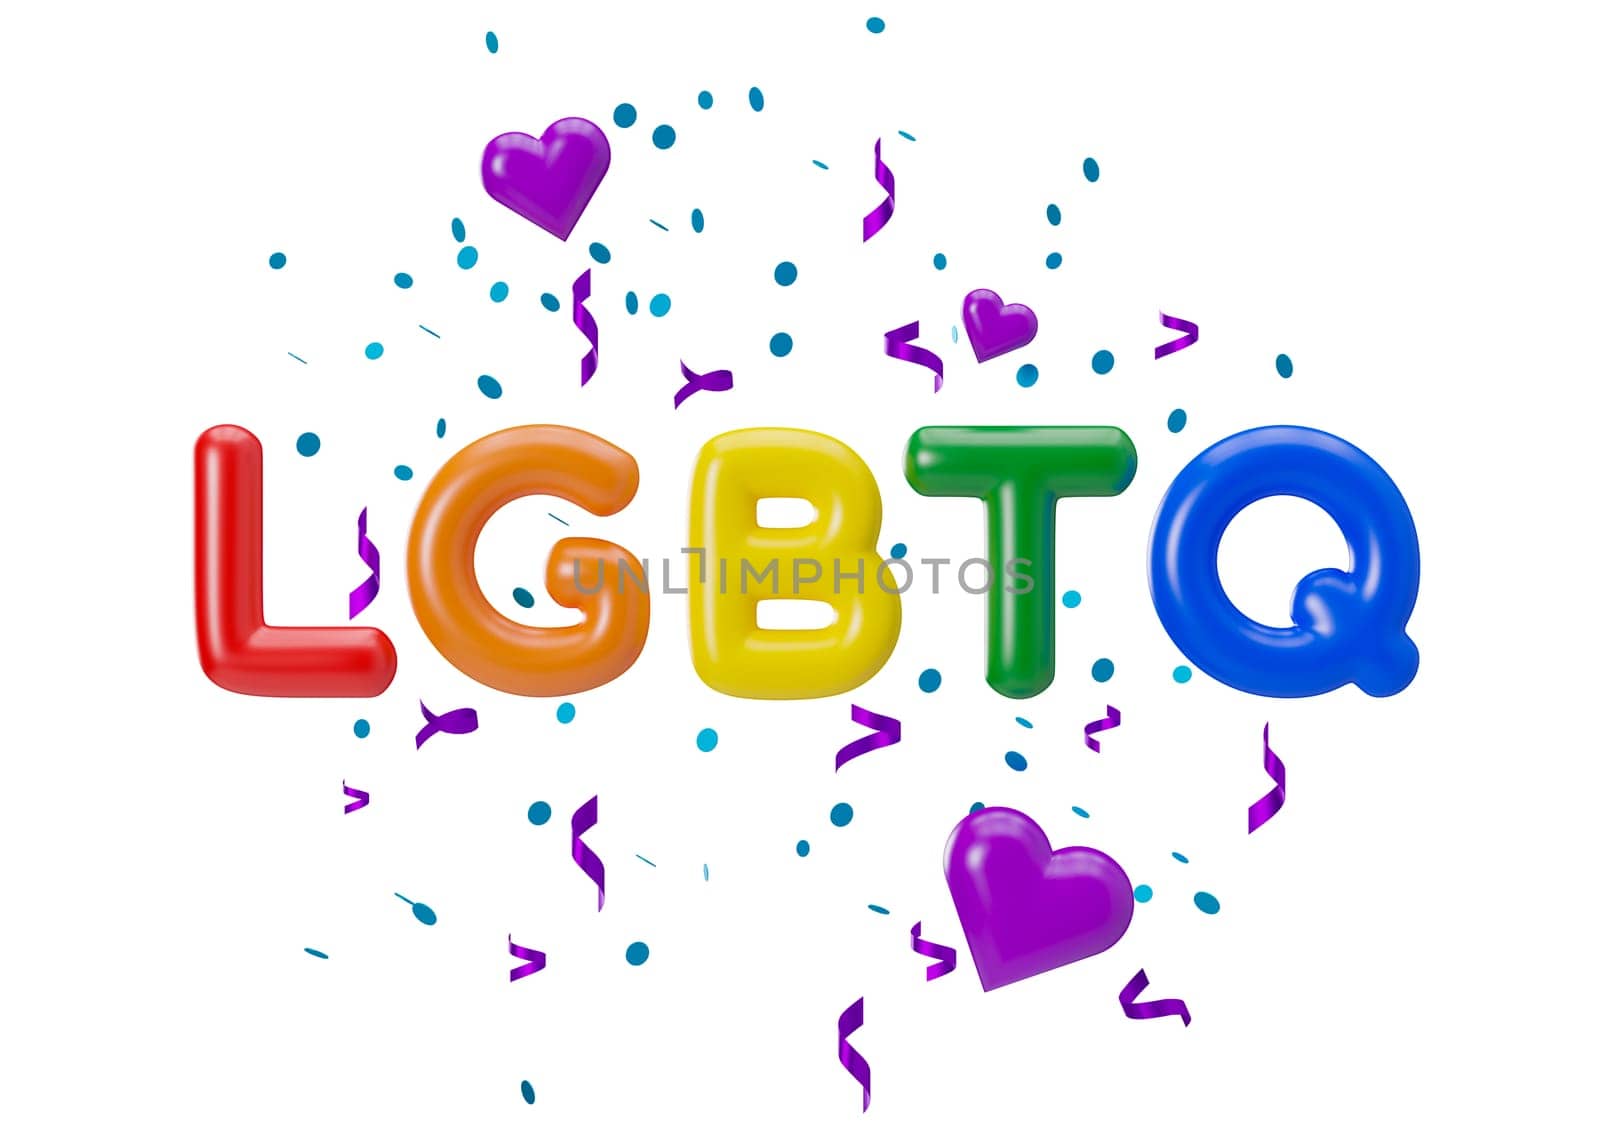 Rainbow LGBTQ letters isolated on white background. LGBT community, include lesbians, gays, bisexuals and transgender people. Alternative love. Diversity, homosexuality, equal marriage. 3D rendering